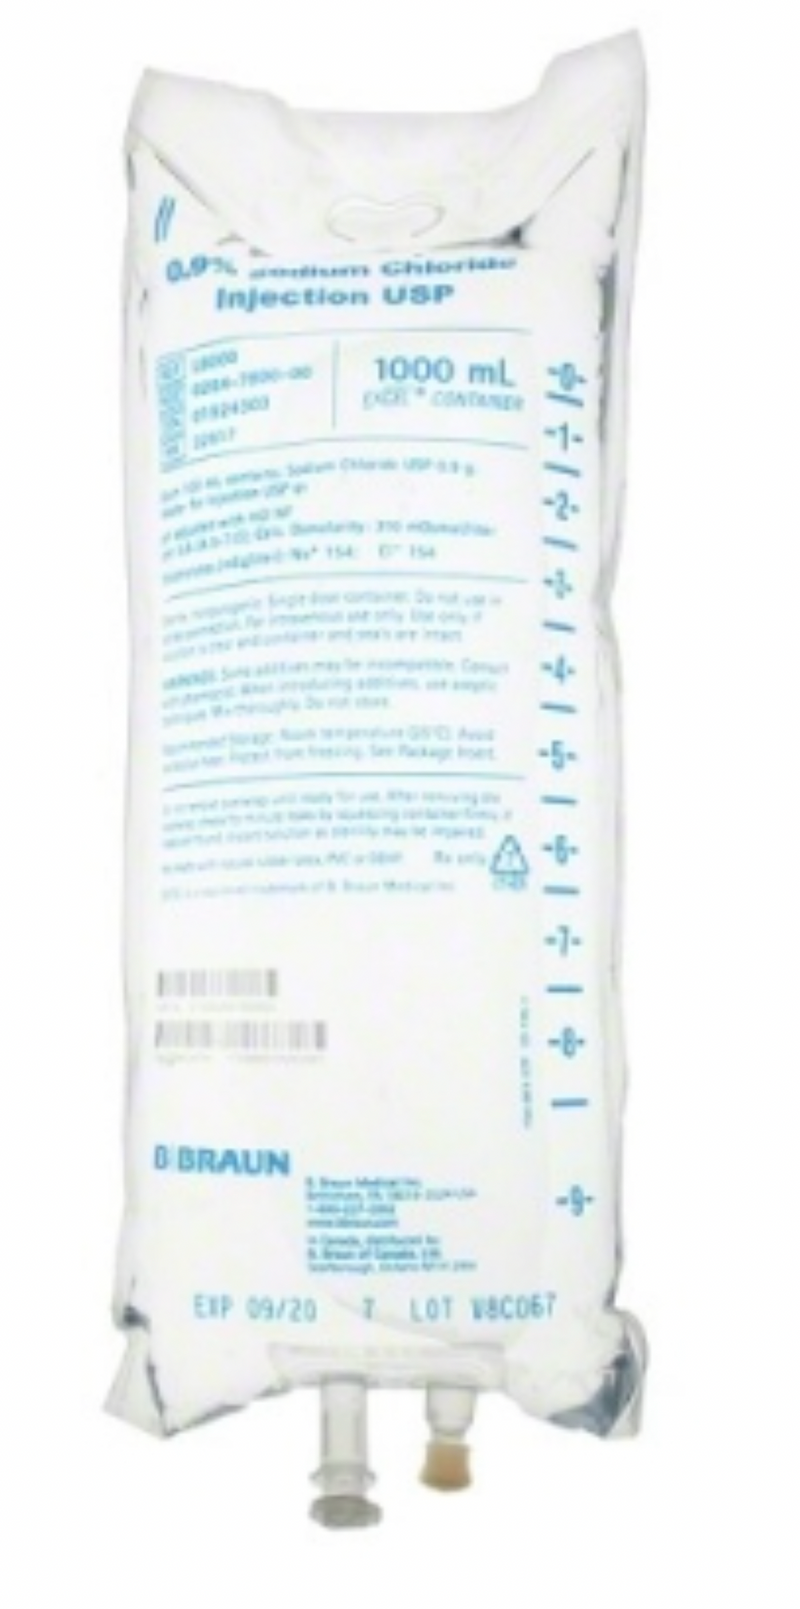 Braun L8000 0.9% Sodium Chloride Injection USP, 1000 mL Excel Containers 12 Units/Case